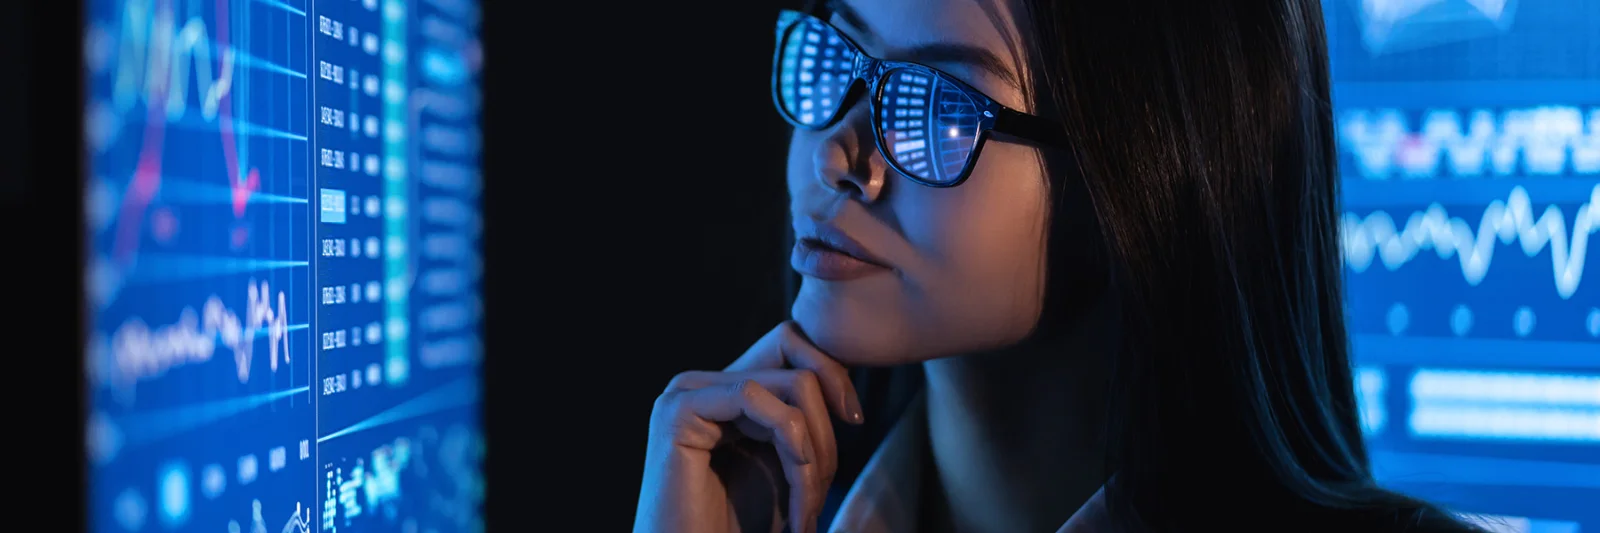 This key visual for Anthos depicts a focused woman wearing glasses that reflect data charts. She is gazing thoughtfully at several digital screens filled with diverse analytics, graphs, and data visualizations. The image conveys a sense of deep analysis, advanced technology, and data-driven decision-making, embodying the sophisticated capabilities and insights provided by Anthos. The blue-toned lighting and high-tech environment emphasize the modern and innovative nature of the Anthos platform.